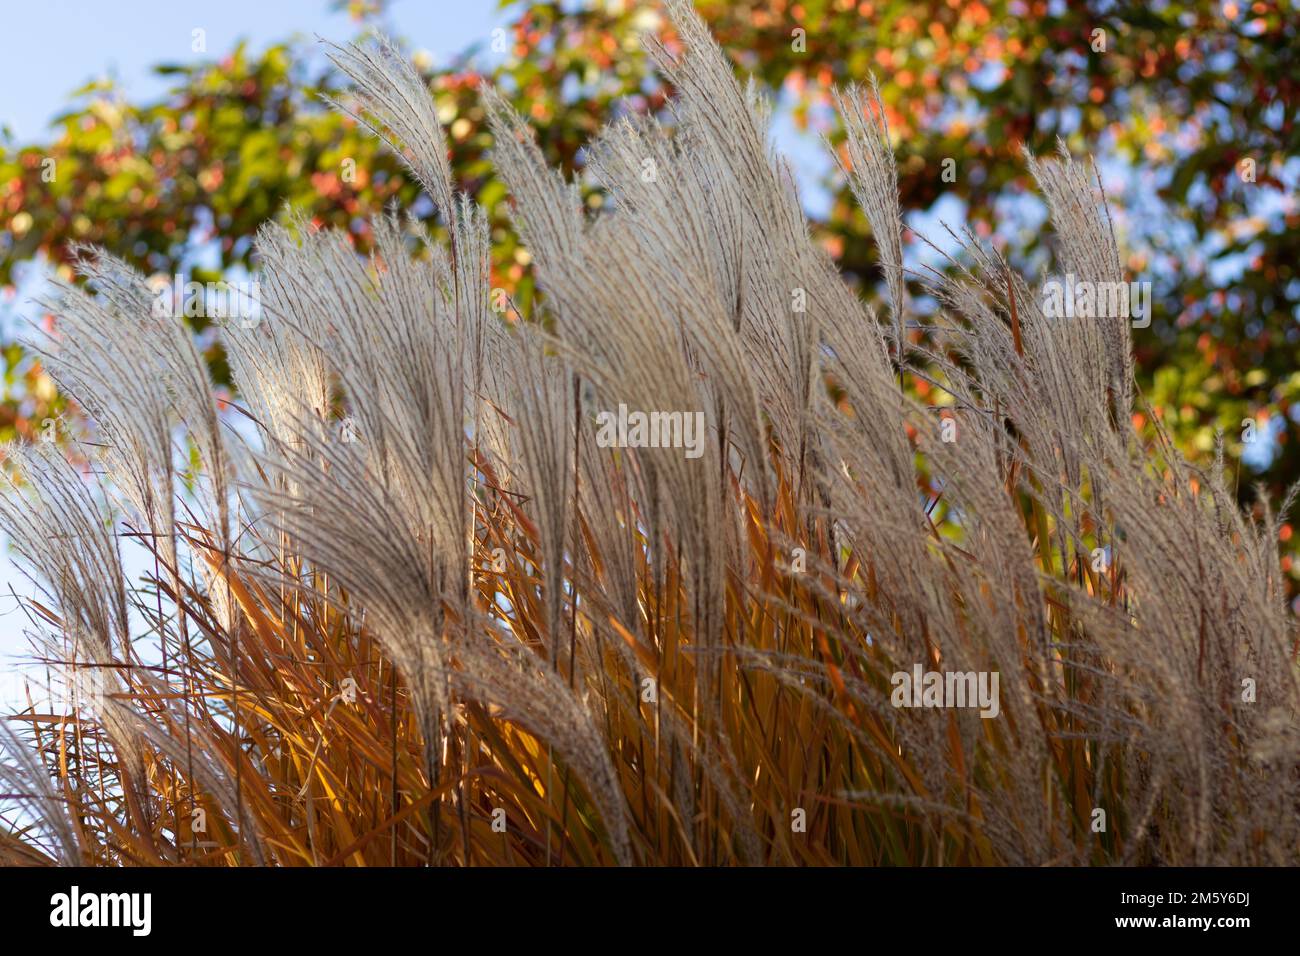 A closeup of amur silver grass, Miscanthus sacchariflorus captured against a blurred background Stock Photo